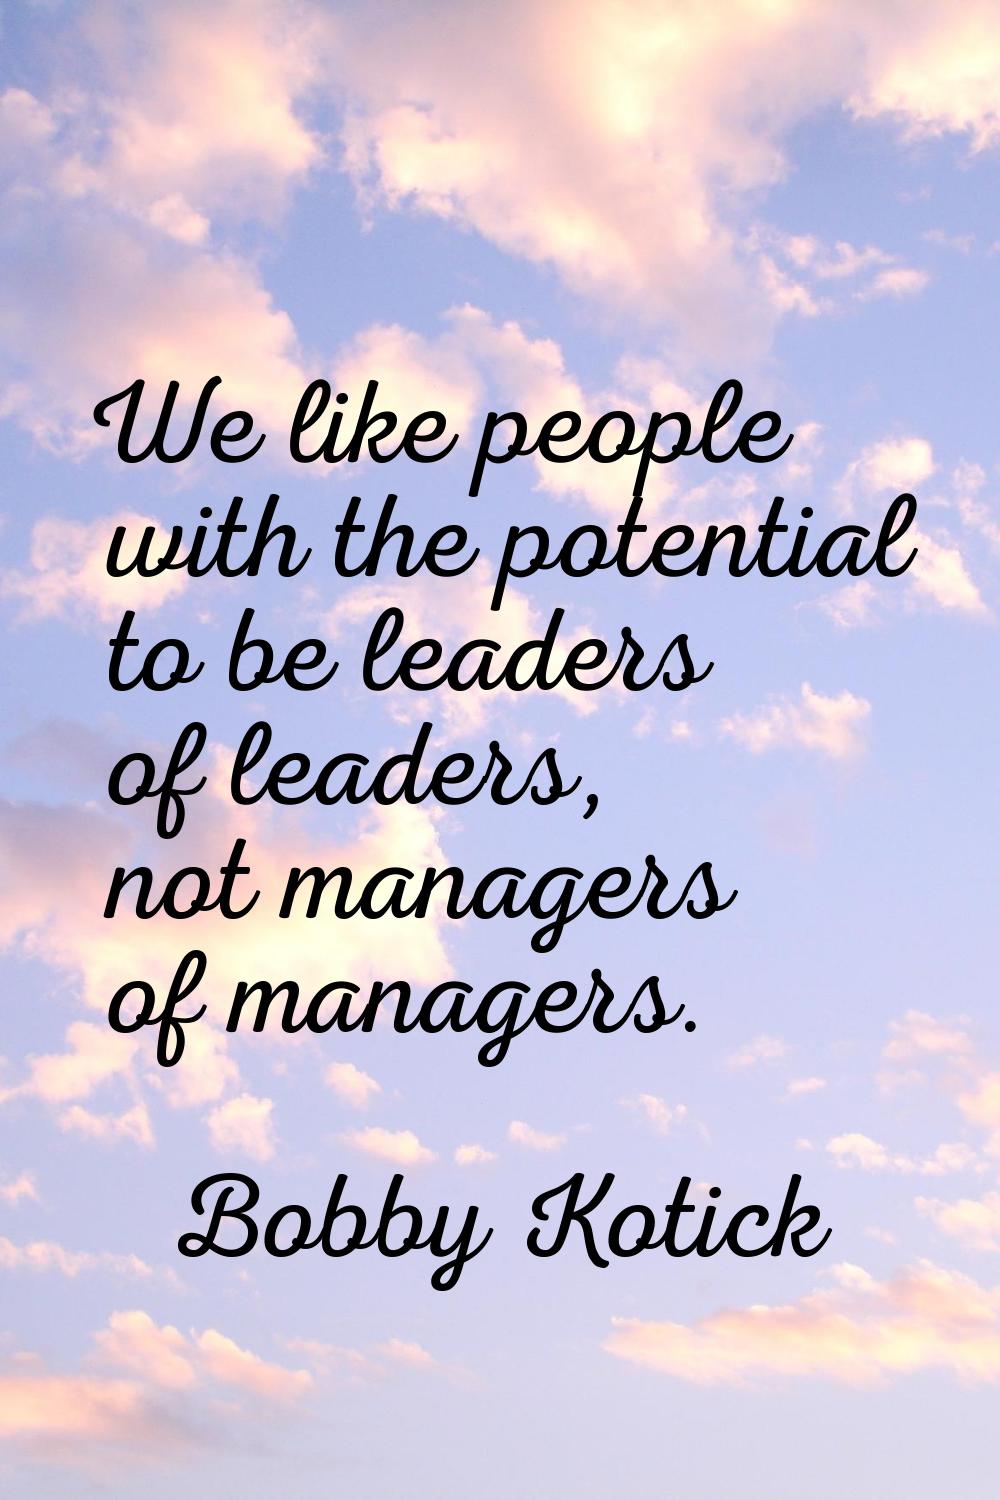 We like people with the potential to be leaders of leaders, not managers of managers.